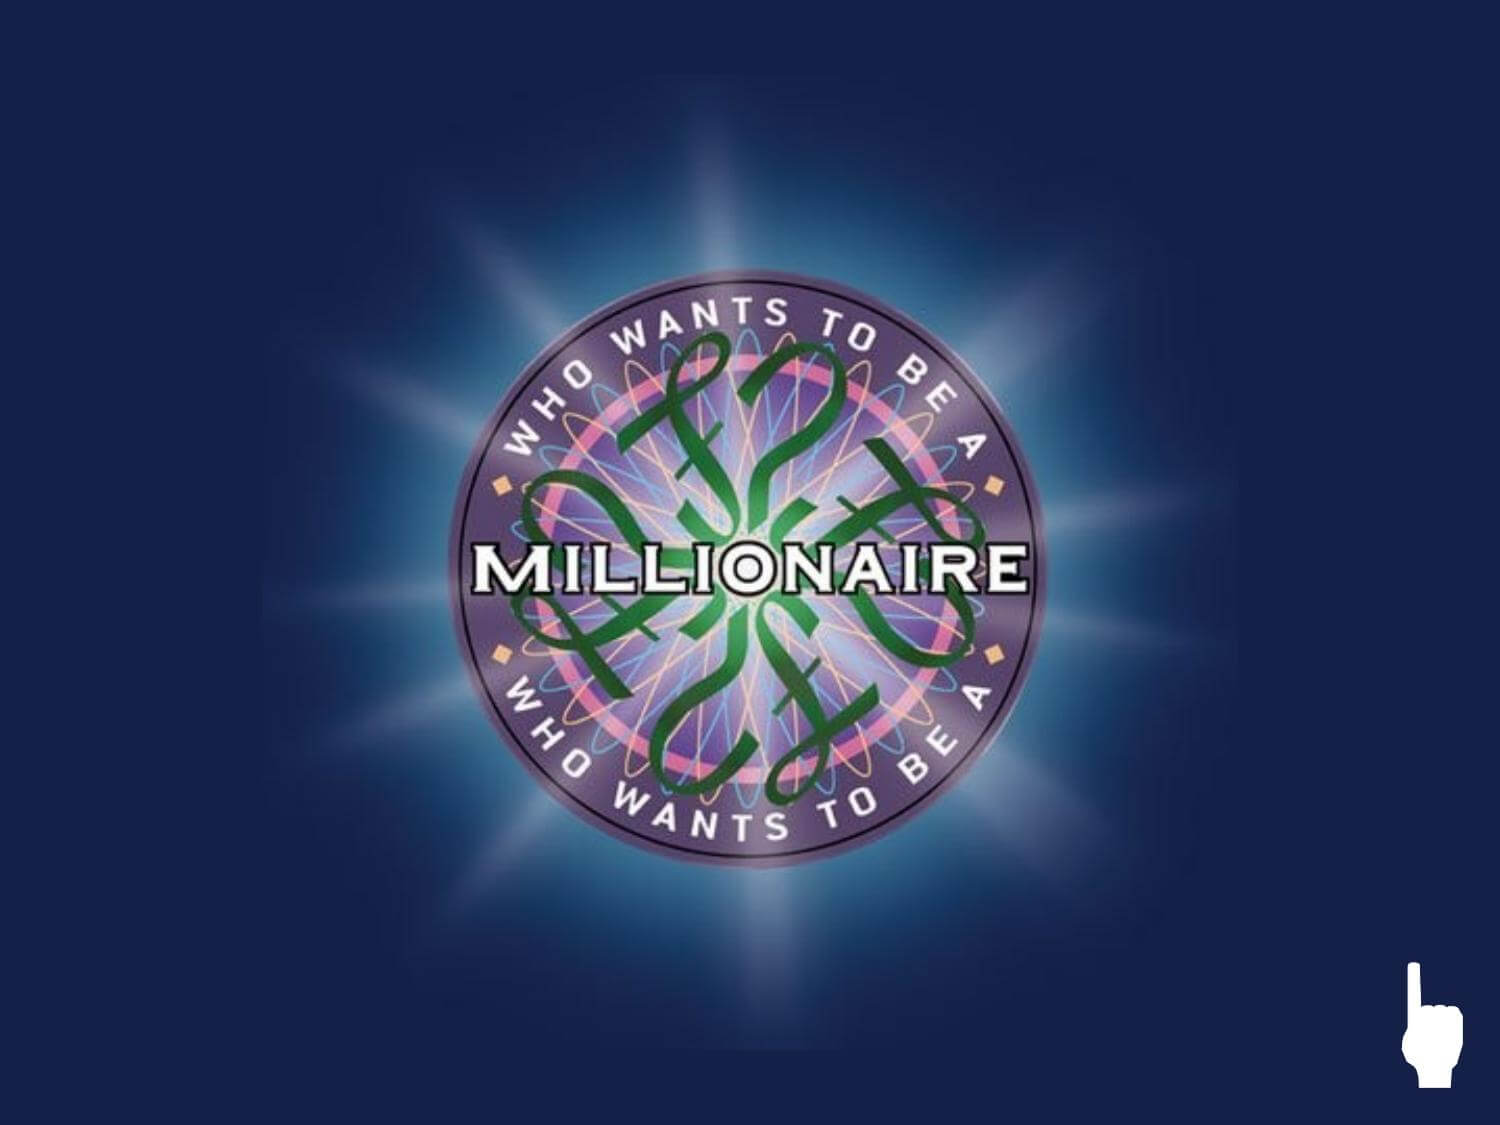 Who Wants To Be A Millionaire Powerpointdanielpanam – Issuu Throughout Who Wants To Be A Millionaire Powerpoint Template